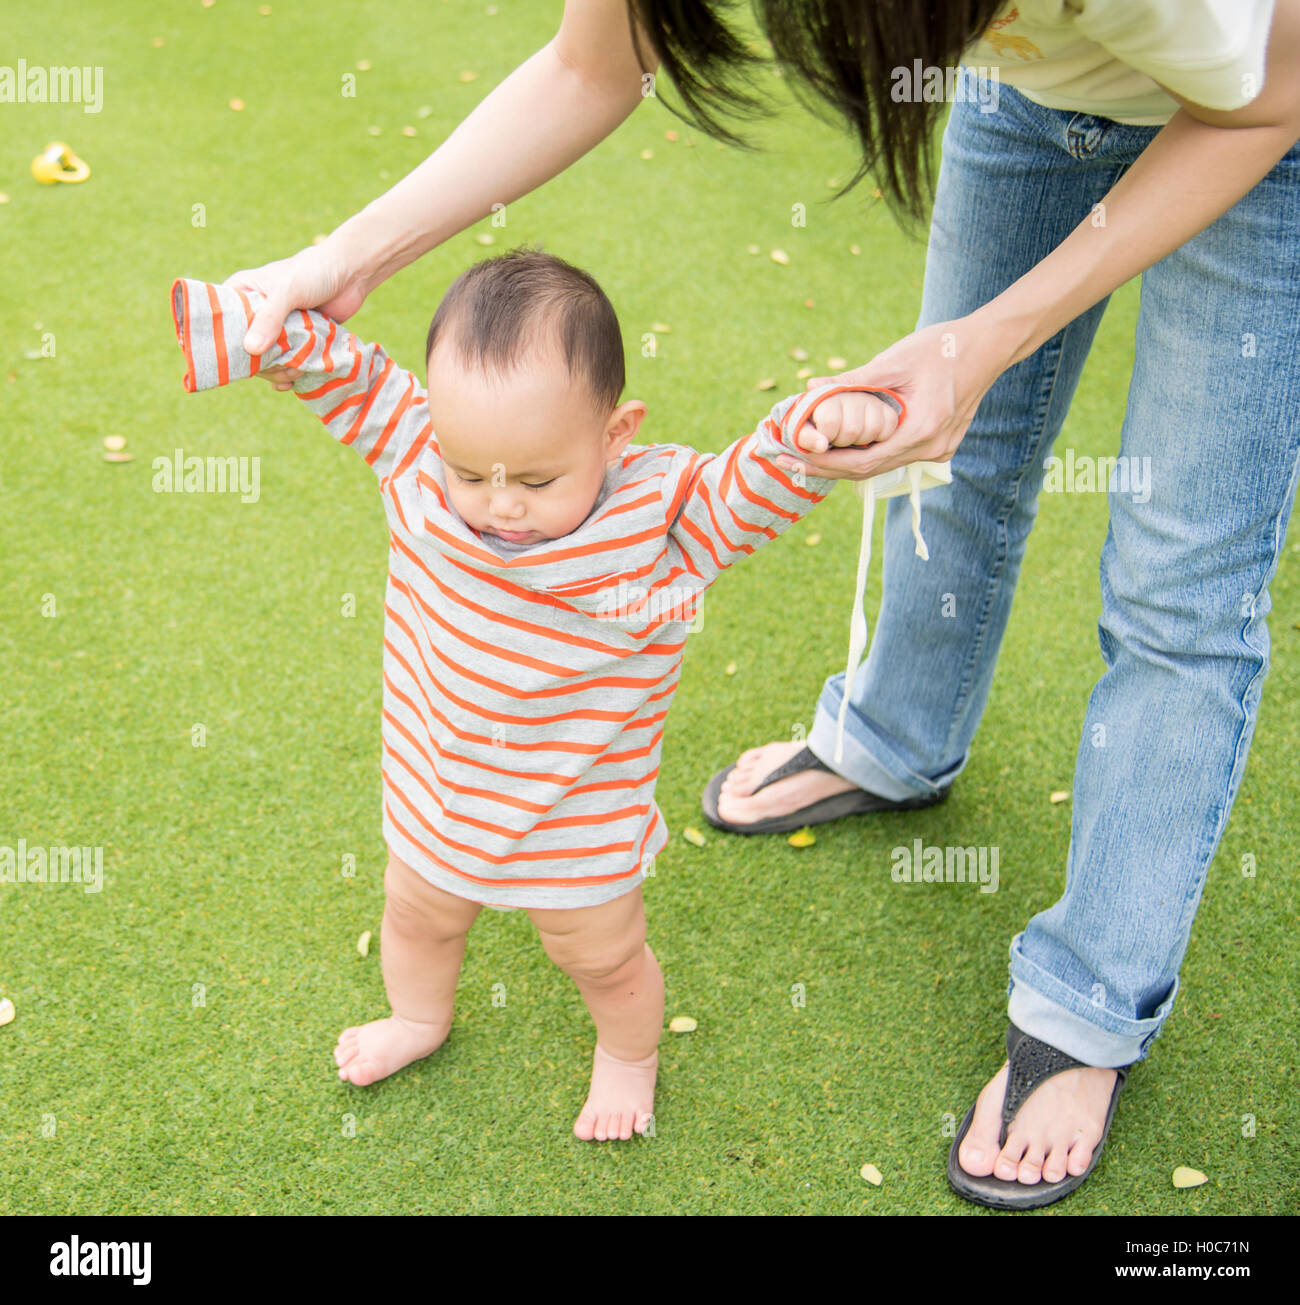 Asian Mother Holding Baby Hand To Walk Training On The Green Glass H0C71Njpg